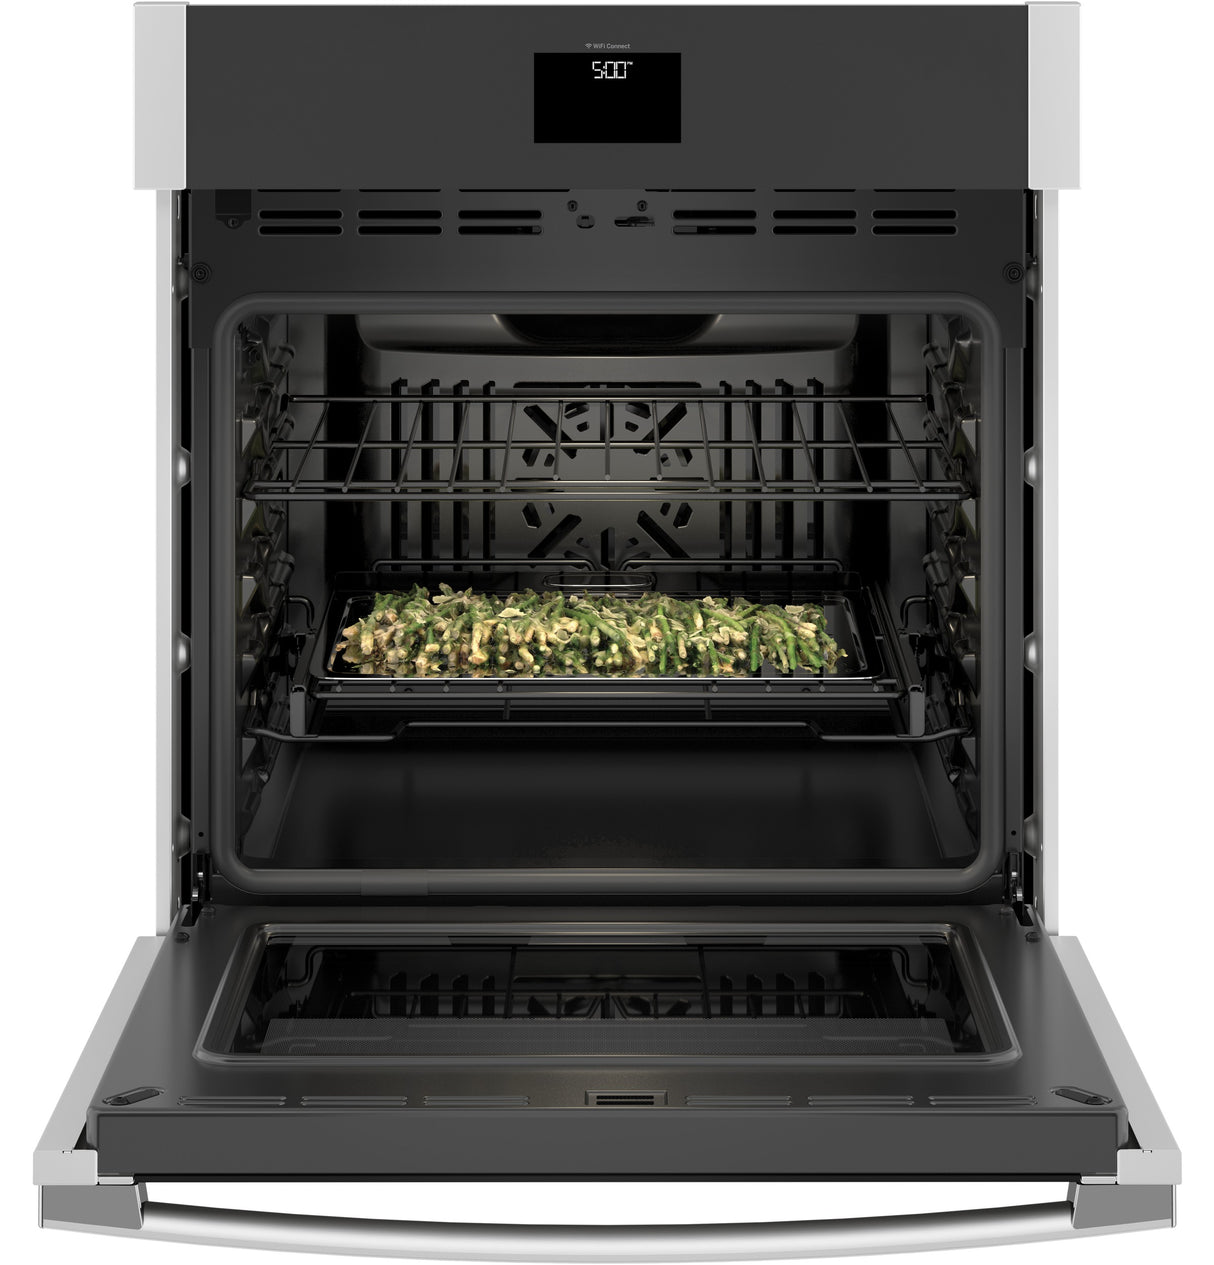 GE(R) 27" Smart Built-In Convection Single Wall Oven - (JKS5000SNSS)